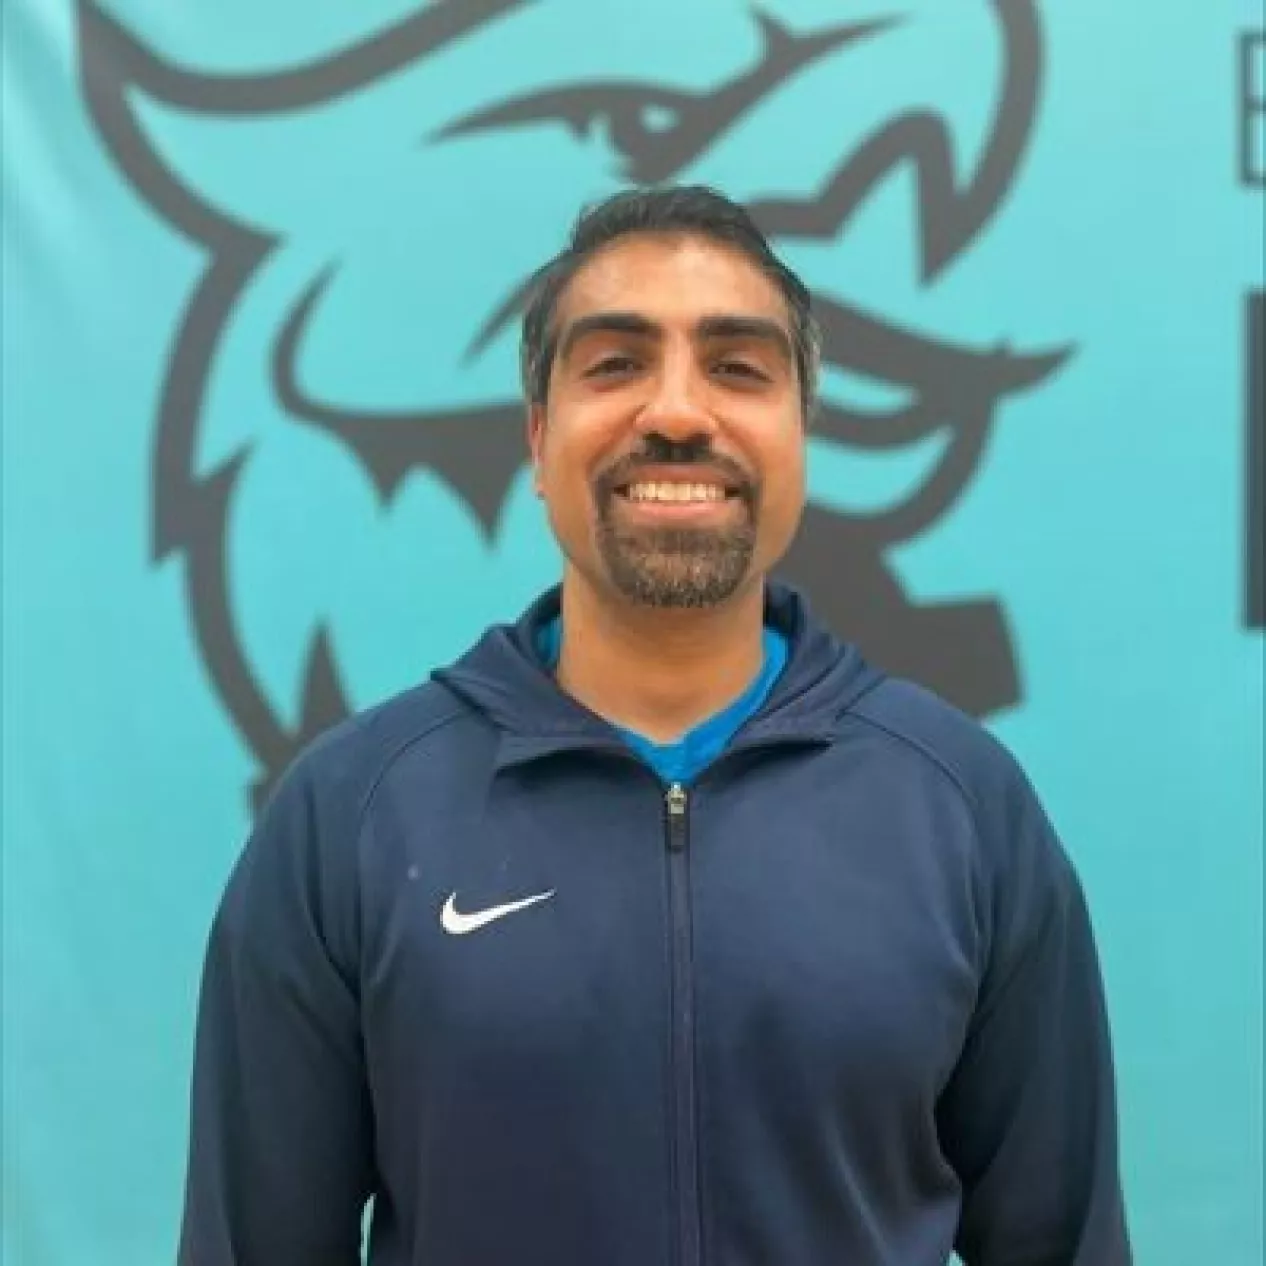 Khalid Yacoob smiling in front of the East London sports phoenix